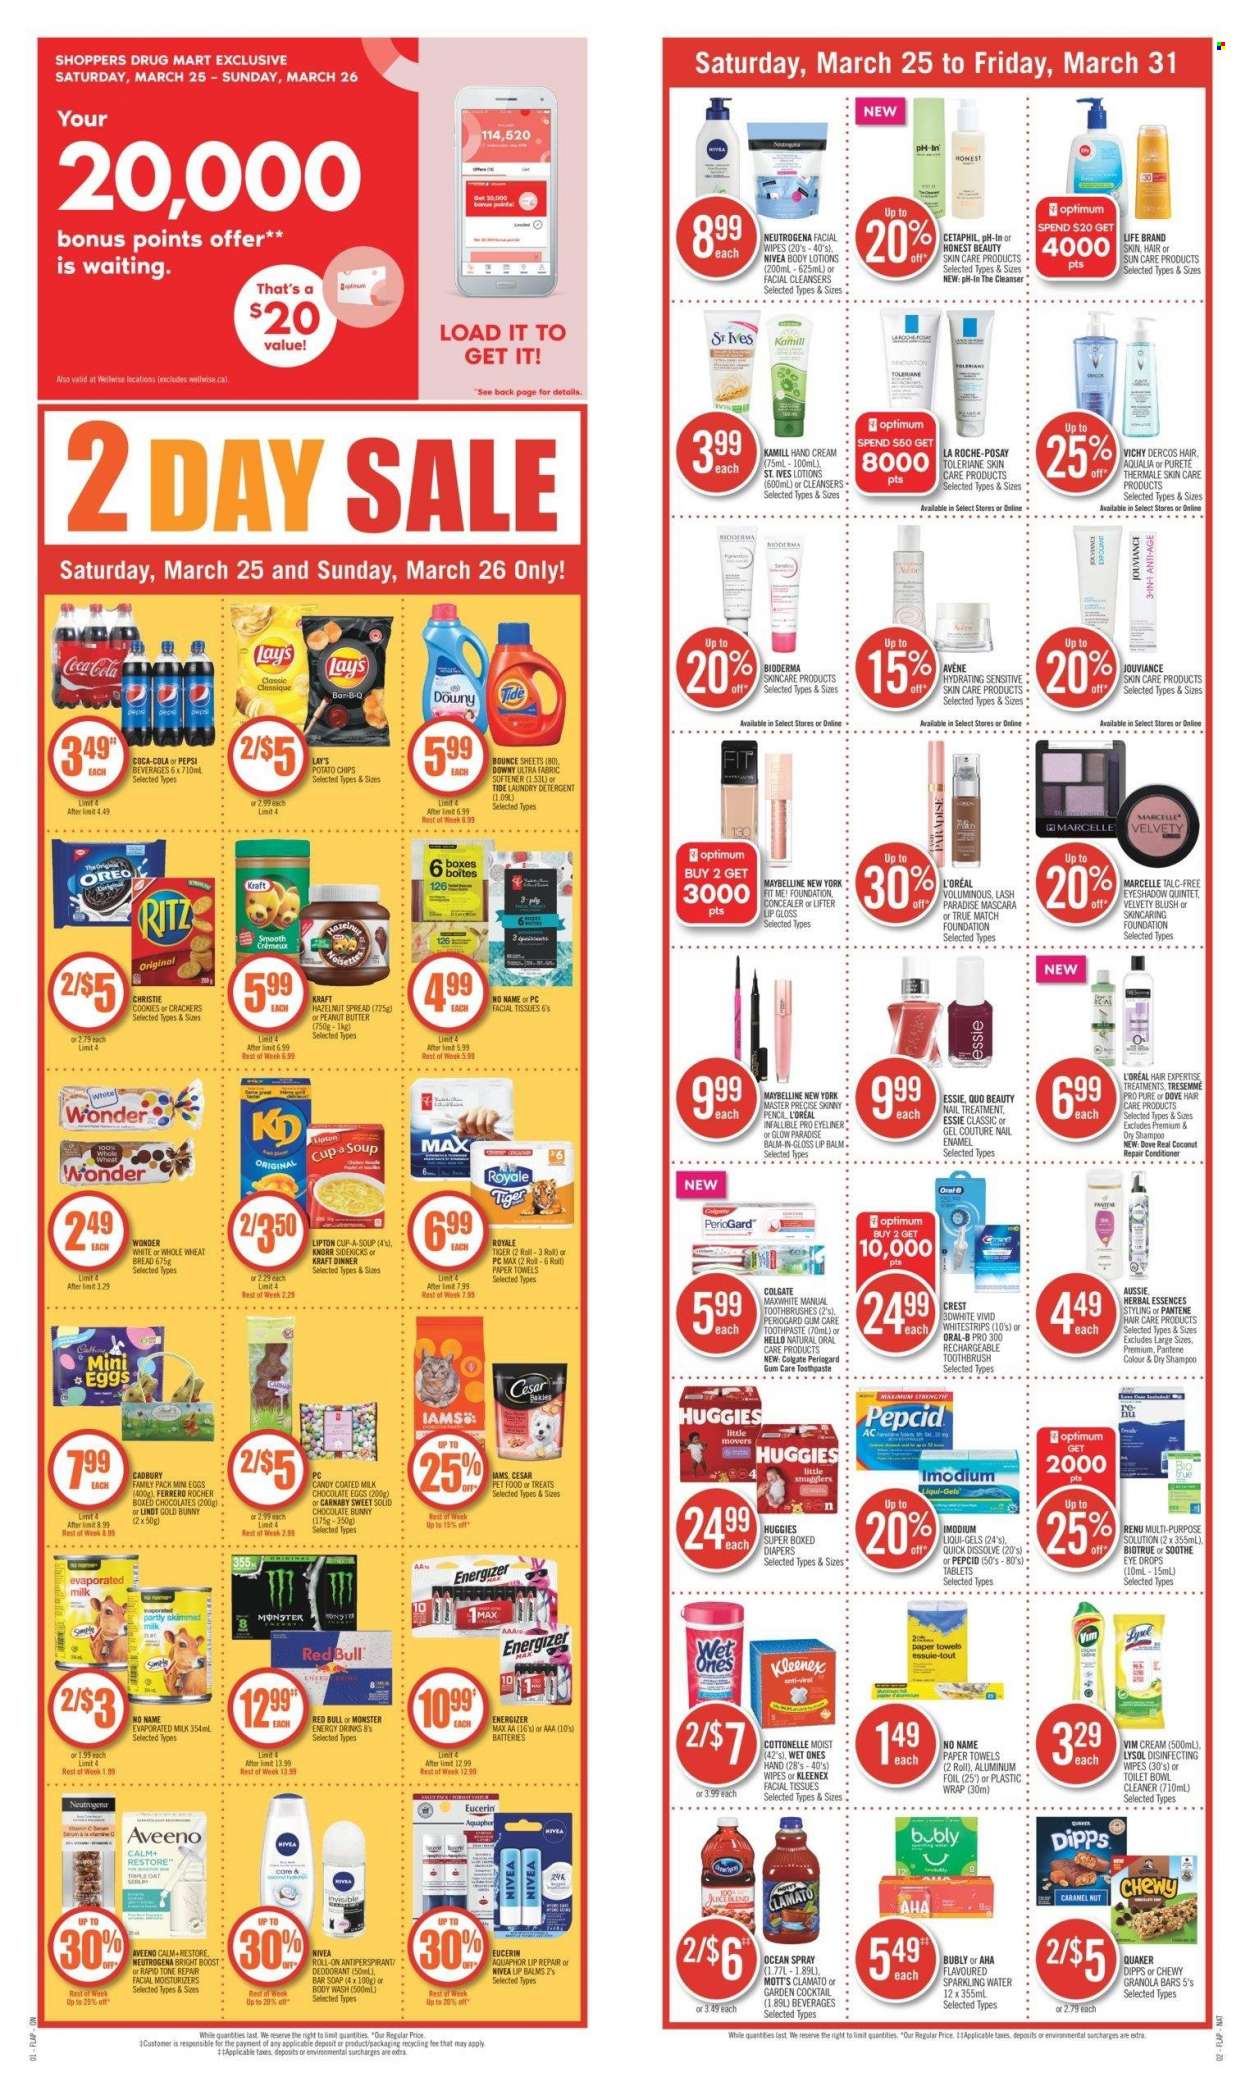 thumbnail - Shoppers Drug Mart Flyer - March 25, 2023 - March 31, 2023 - Sales products - wheat bread, No Name, soup, Quaker, Kraft®, evaporated milk, cookies, Dove, milk chocolate, Cadbury, chocolate bunny, Mott's, RITZ, potato chips, chips, Lay’s, granola bar, caramel, hazelnut spread, Coca-Cola, Pepsi, energy drink, Monster, Clamato, Red Bull, Monster Energy, sparkling water, water, Boost, wipes, nappies, Aquaphor, Aveeno, Nivea, Cottonelle, Kleenex, tissues, kitchen towels, paper towels, cleaner, Lysol, Tide, fabric softener, laundry detergent, Bounce, Downy Laundry, body wash, Vichy, soap bar, soap, toothbrush, toothpaste, Crest, cleanser, facial tissues, L’Oréal, La Roche-Posay, lip balm, moisturizer, Aussie, conditioner, TRESemmé, Pantene, Herbal Essences, hand cream, anti-perspirant, roll-on, nail enamel, corrector, eyeshadow, lip gloss, mascara, Maybelline, eyeliner, cup, aluminium foil, battery, animal food, Optimum, Iams, magnesium, Pepcid, Biotrue, eye drops, detergent, Energizer, Colgate, Eucerin, Neutrogena, shampoo, Huggies, Imodium, Oreo, Oral-B, Lipton, Knorr, Lindt, Ferrero Rocher, deodorant. Page 20.